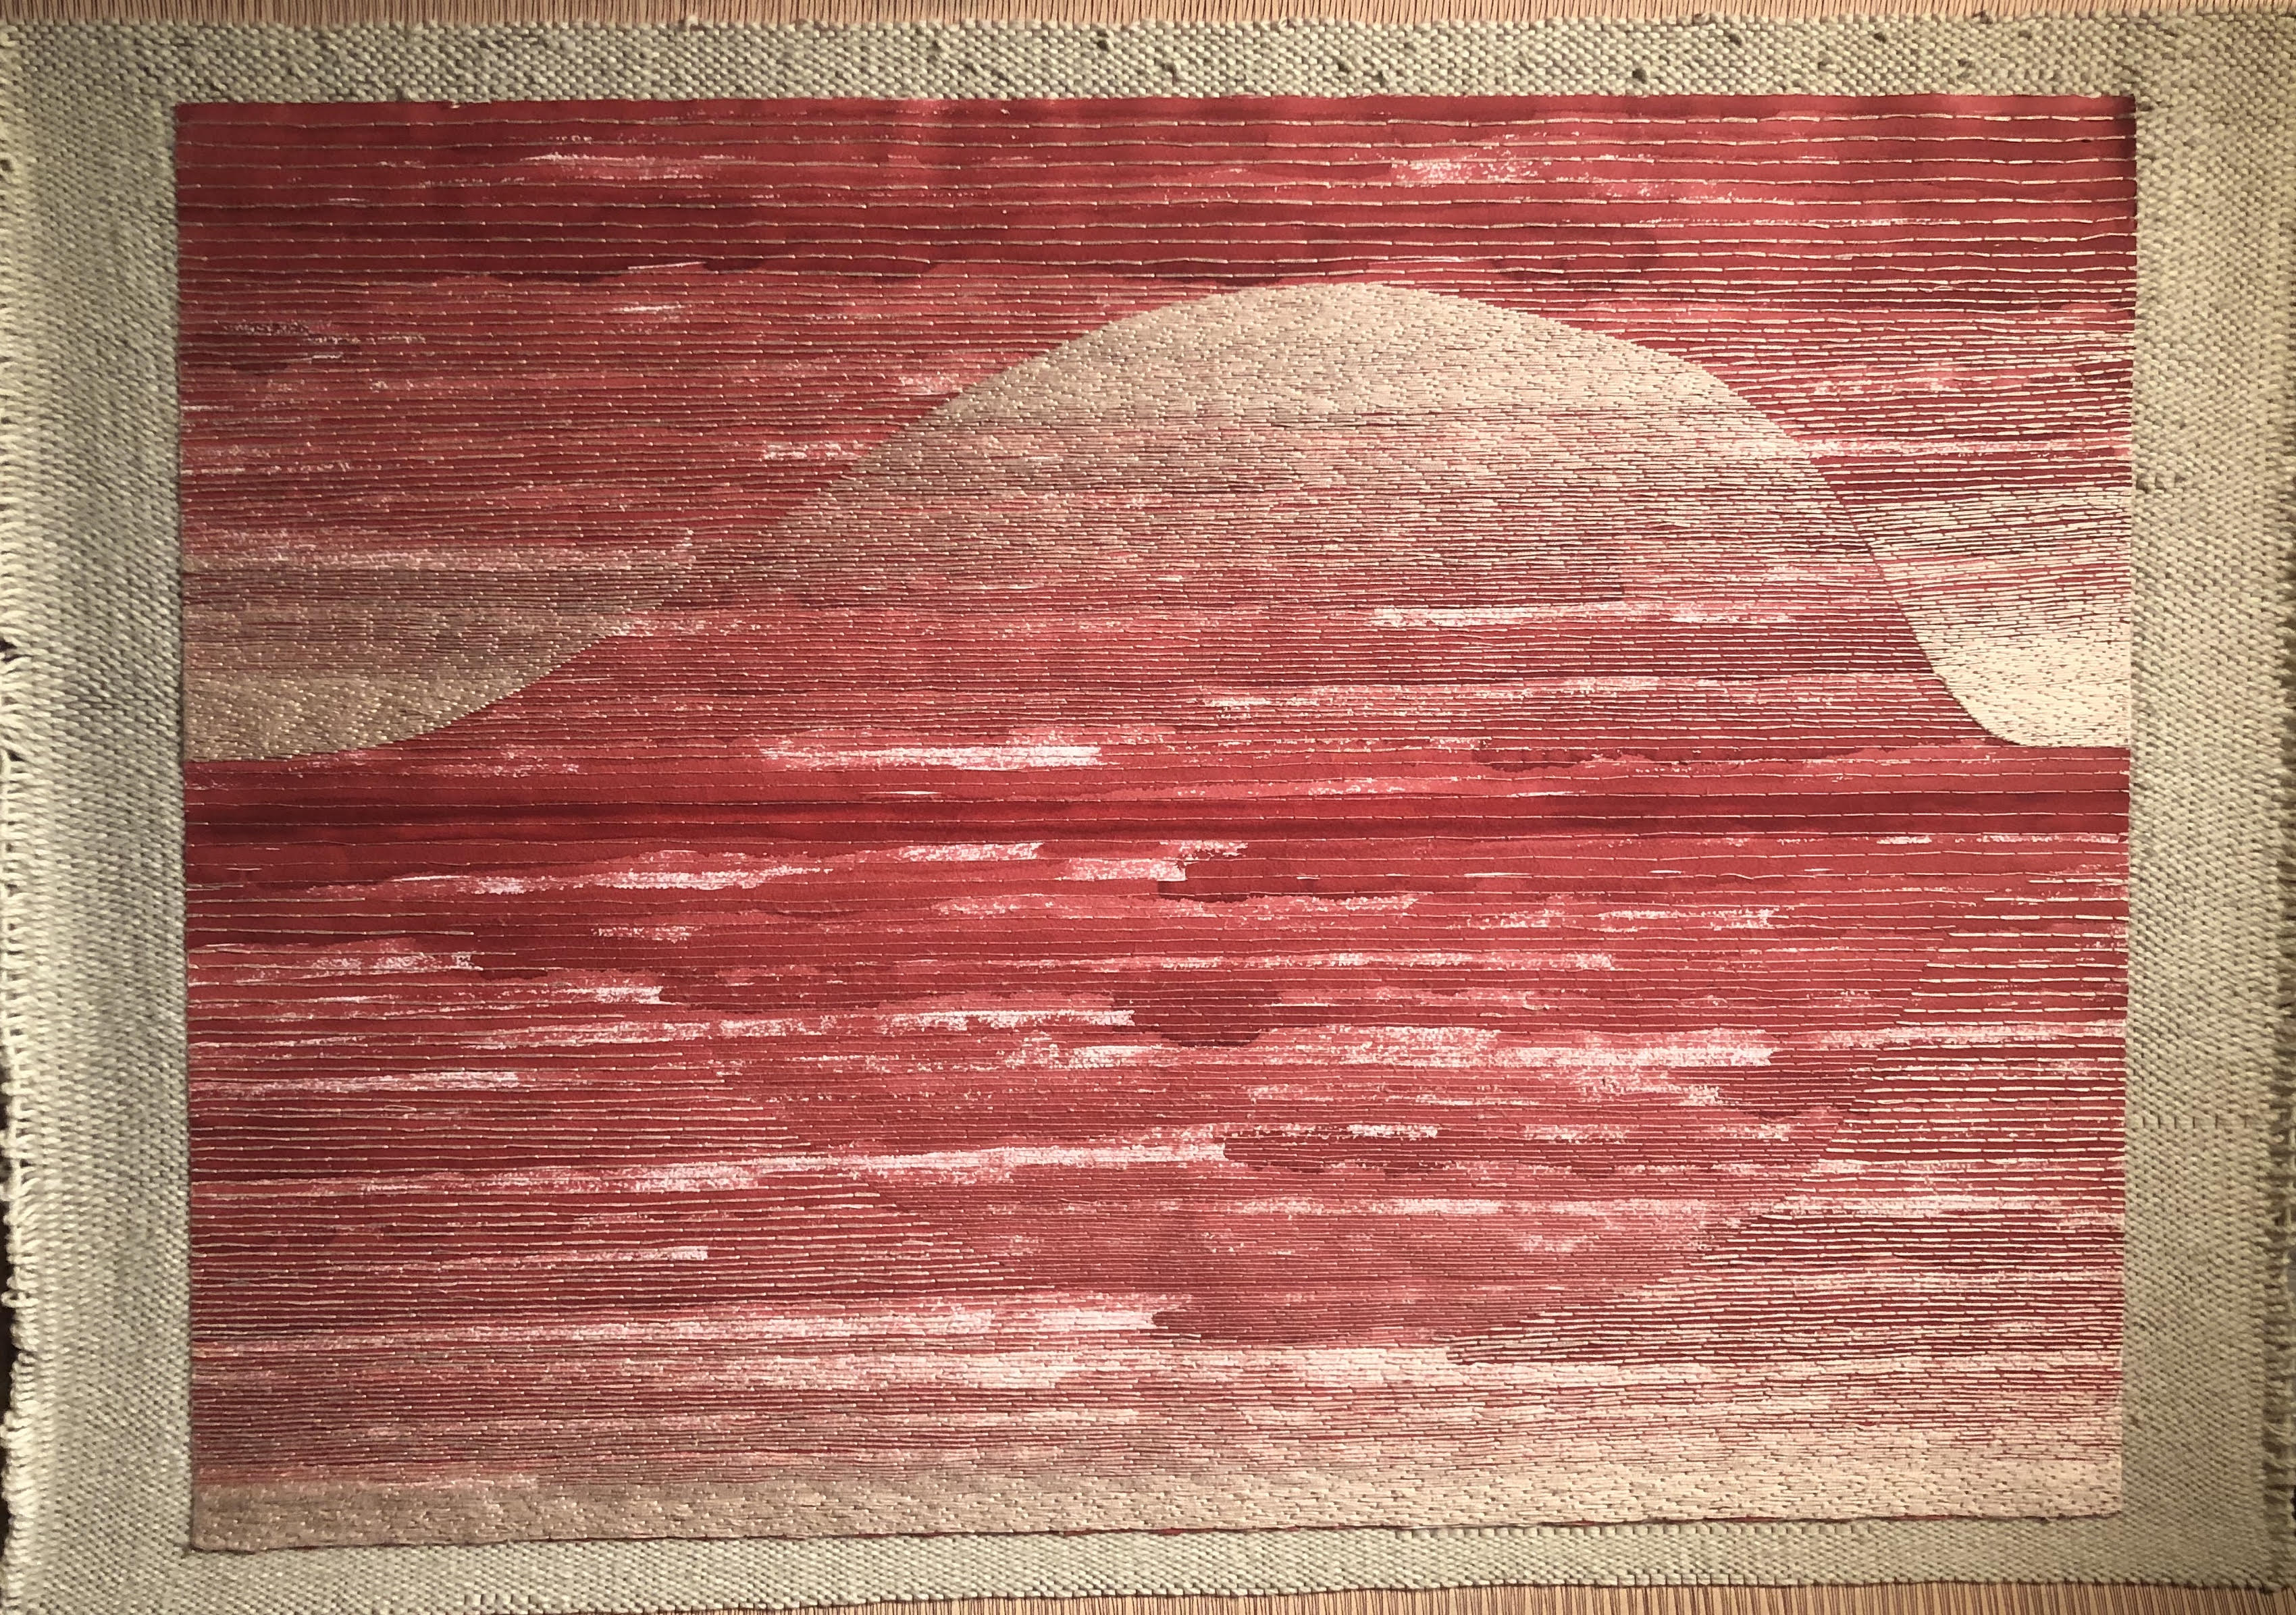 Red#1, Cotton thread over watercolor, 35